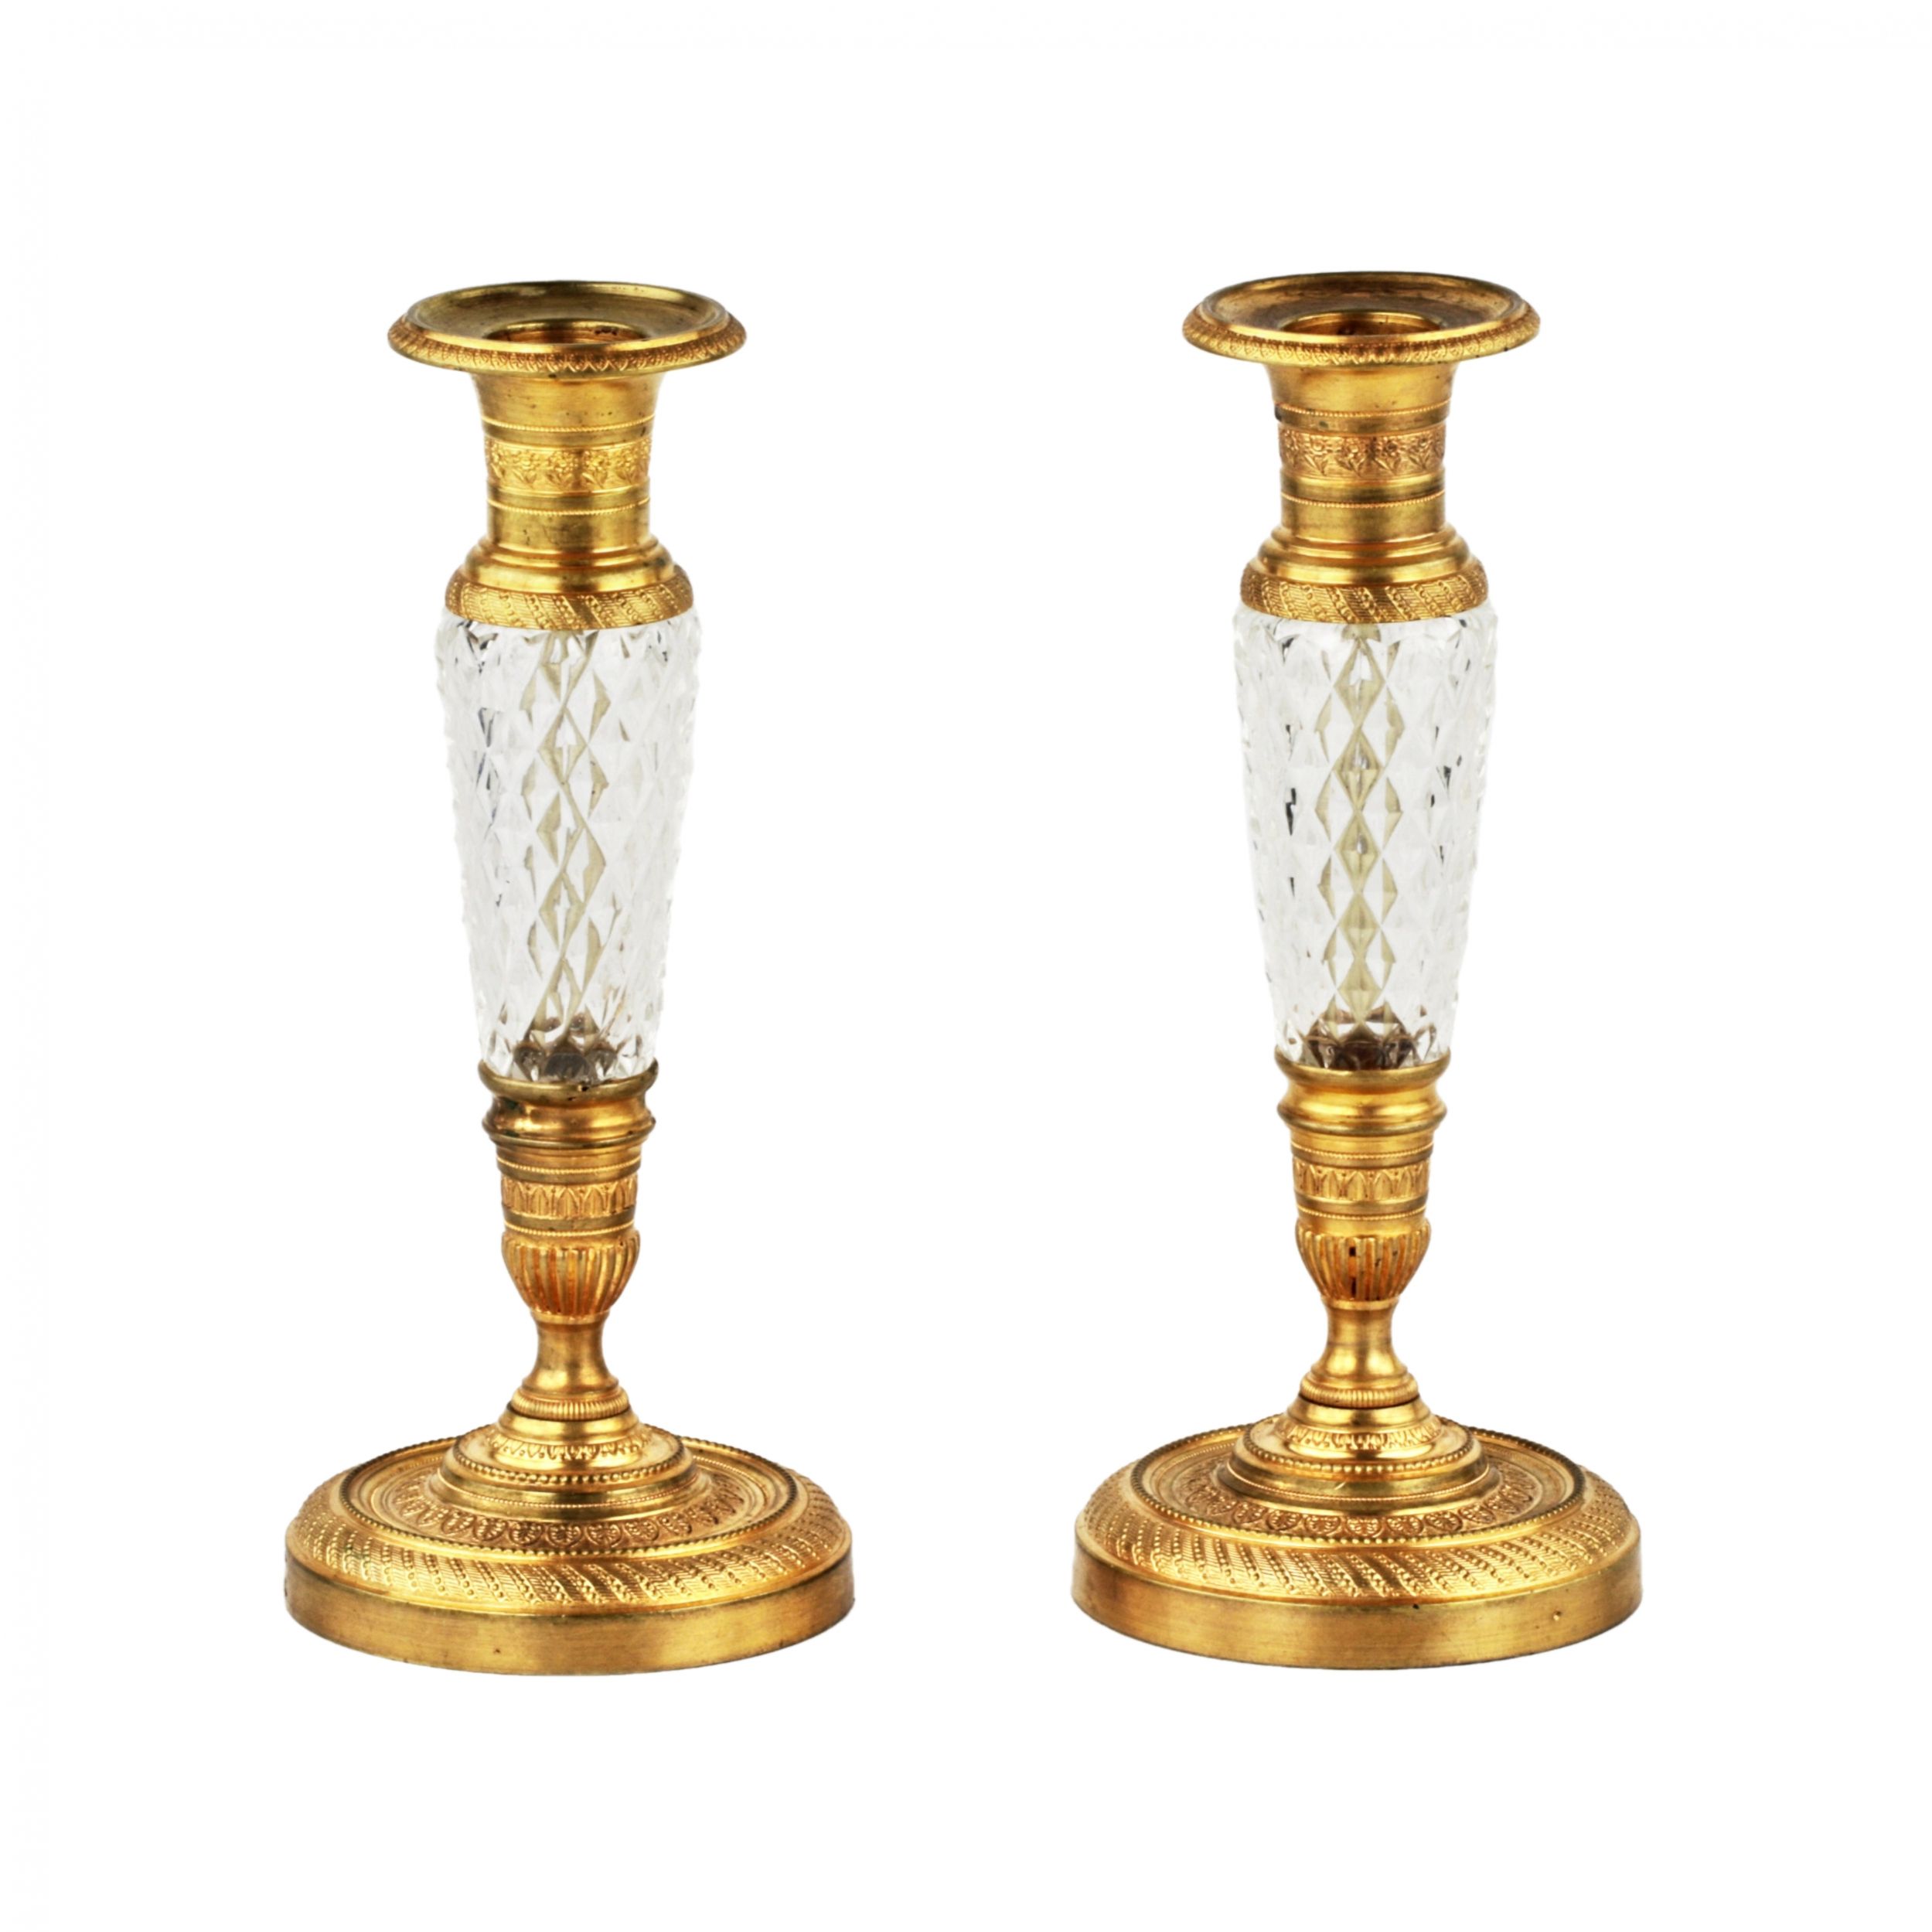 Pair-of-Empire-candlesticks-from-the-1900s-